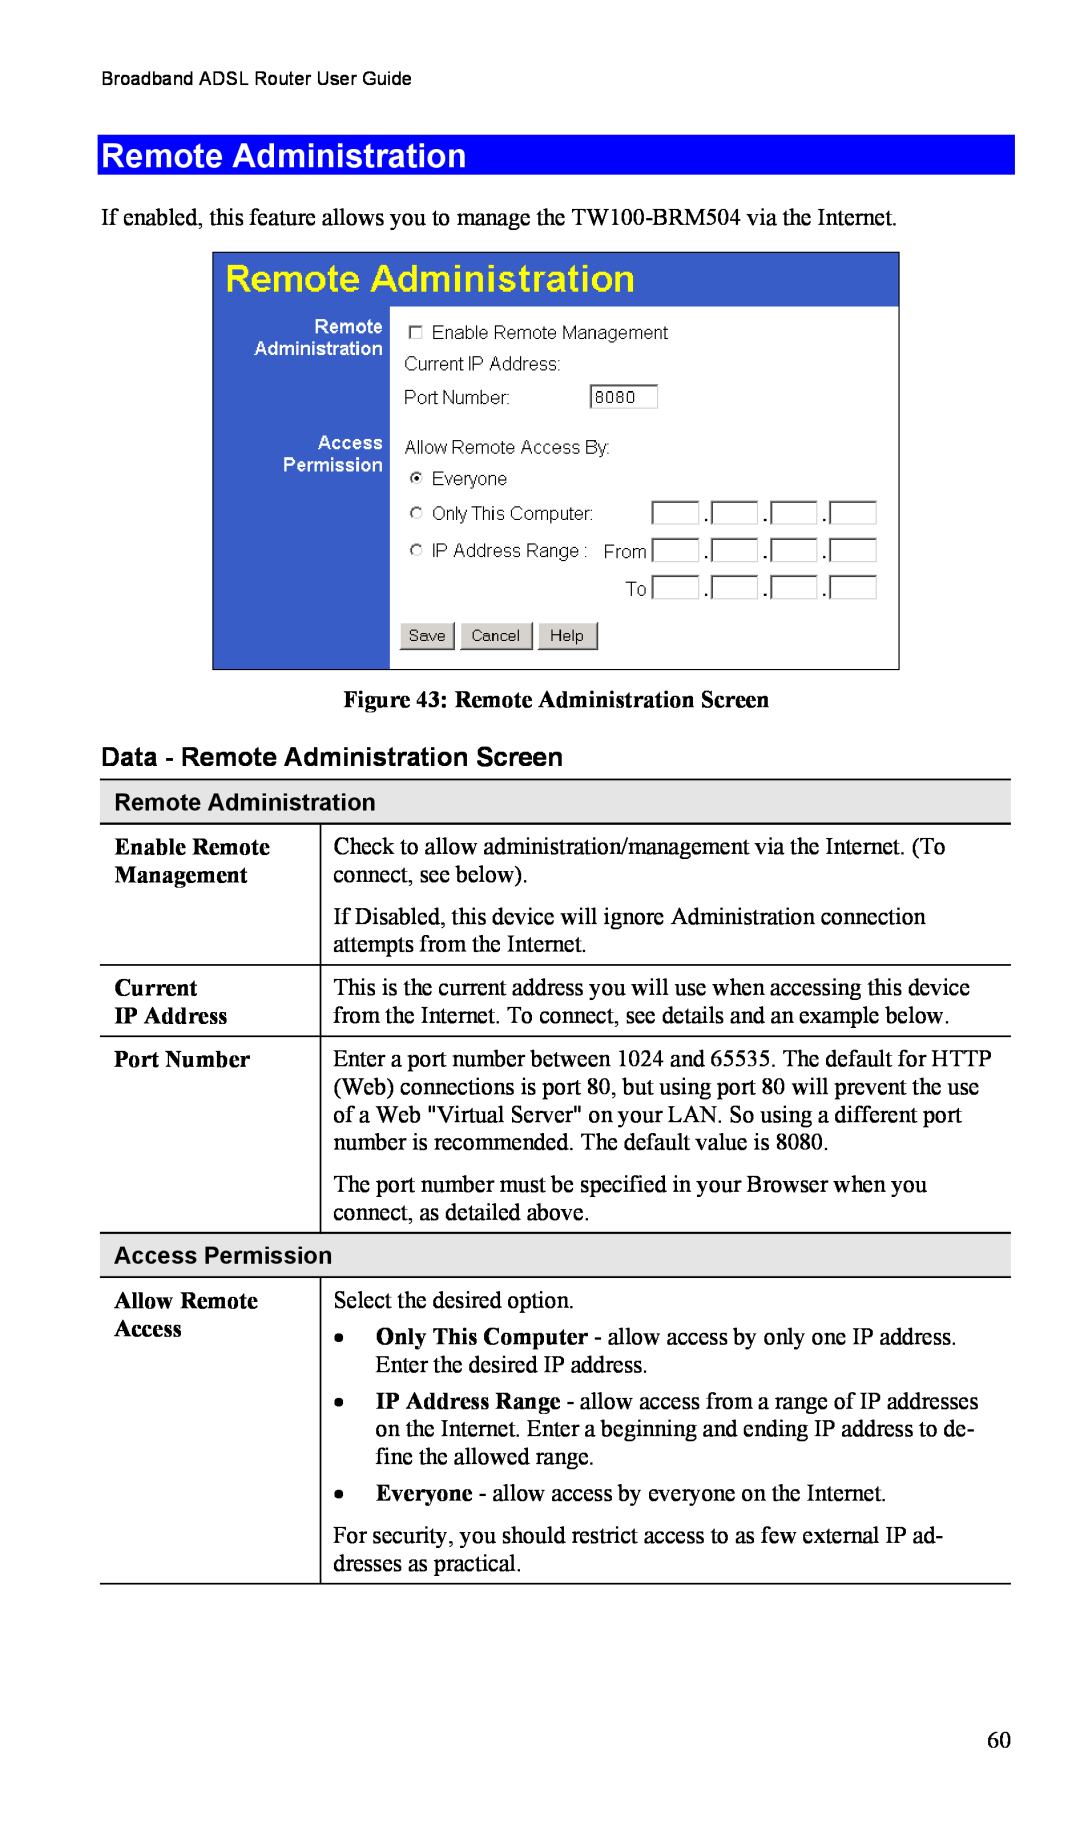 TRENDnet TW100-BRM504 manual Data - Remote Administration Screen, Access Permission 